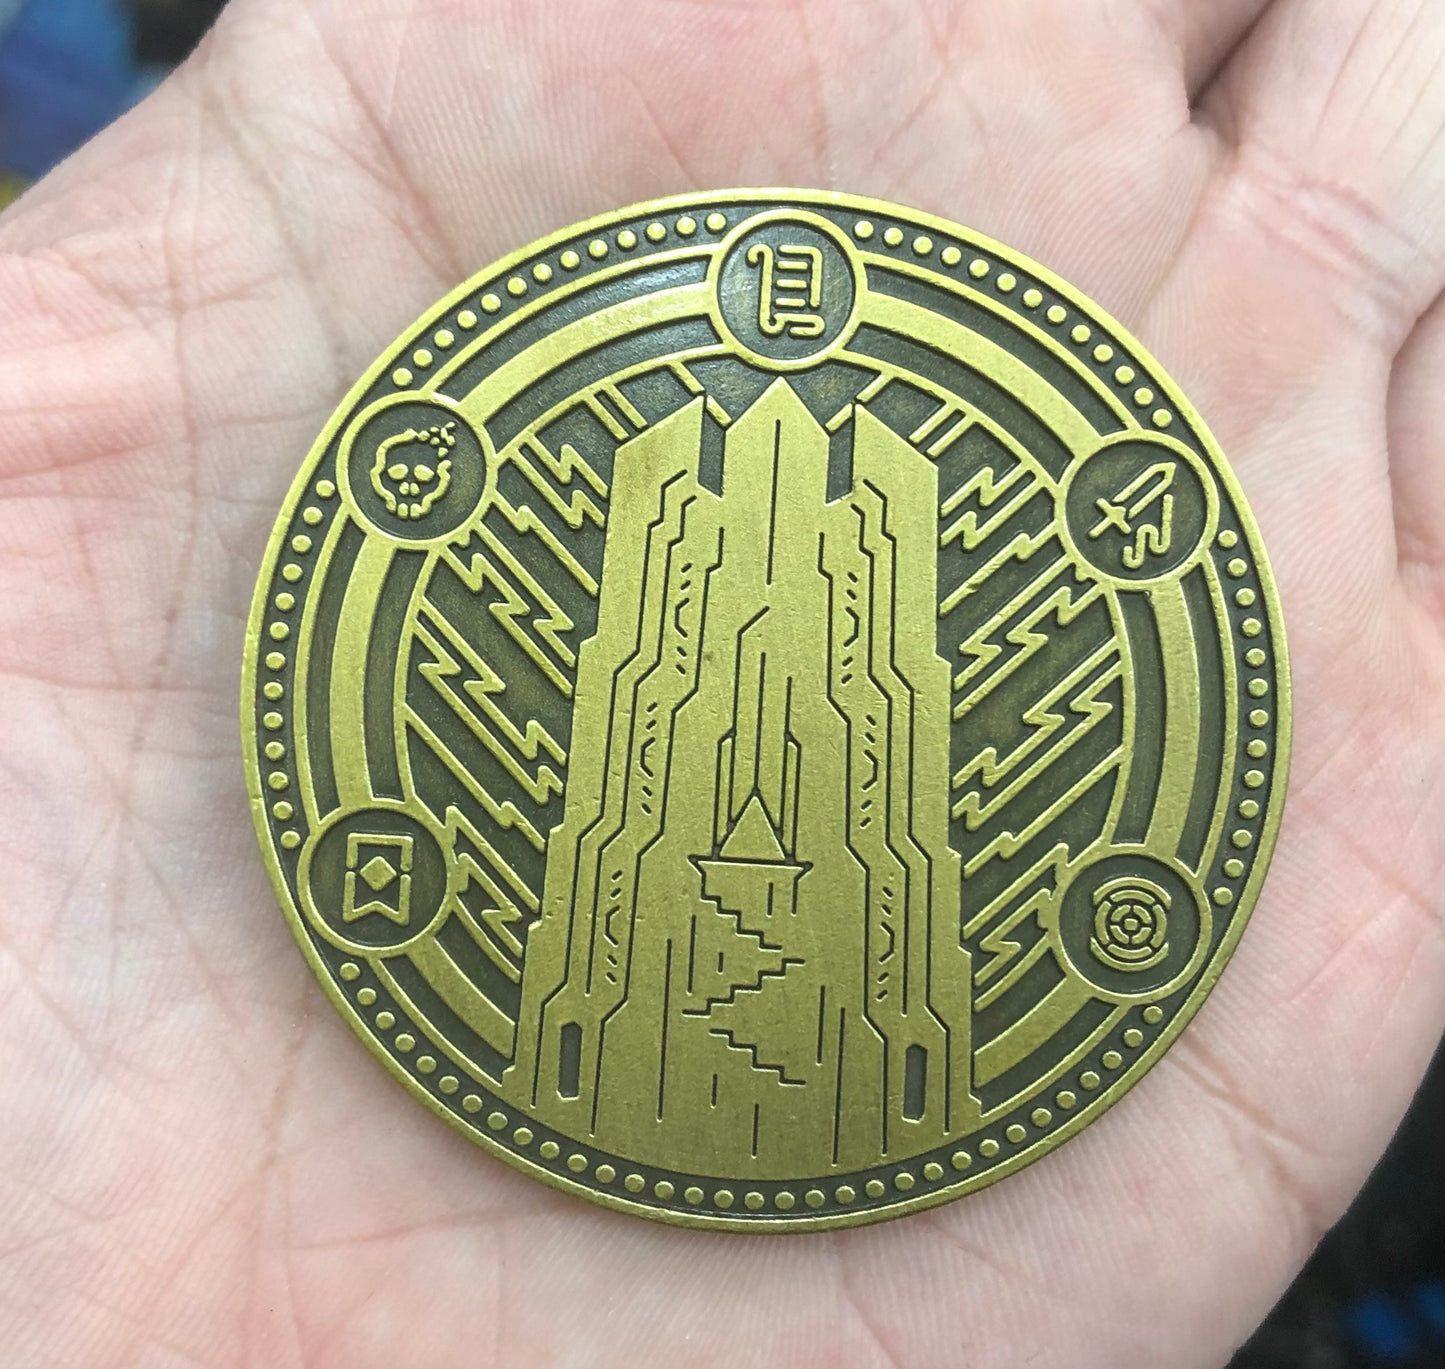 RETURN TO DARK TOWER COIN OF THE REALM